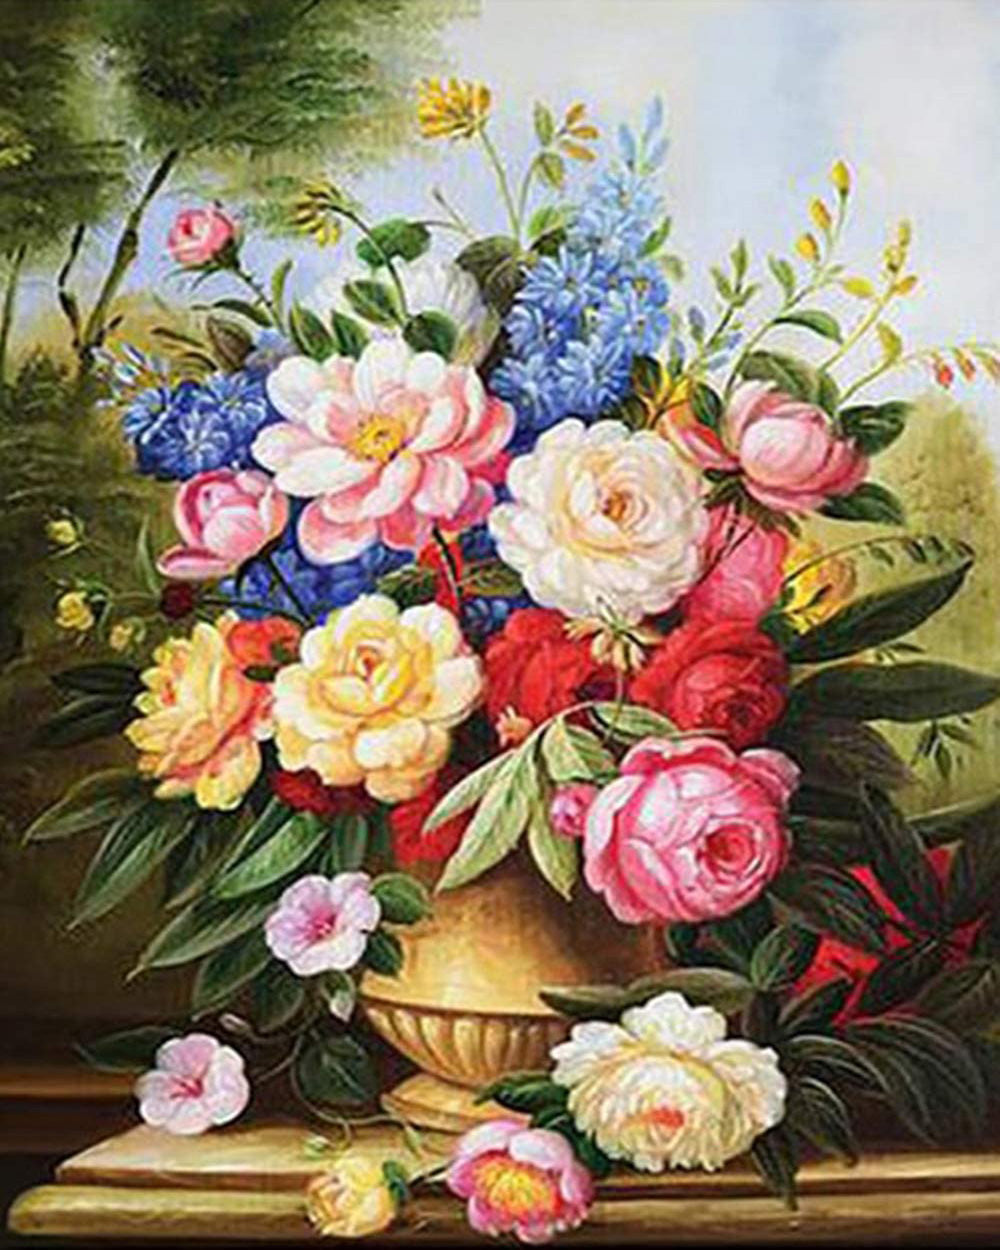 Stamped Cross Stitch Kit - Countryside Bouquet